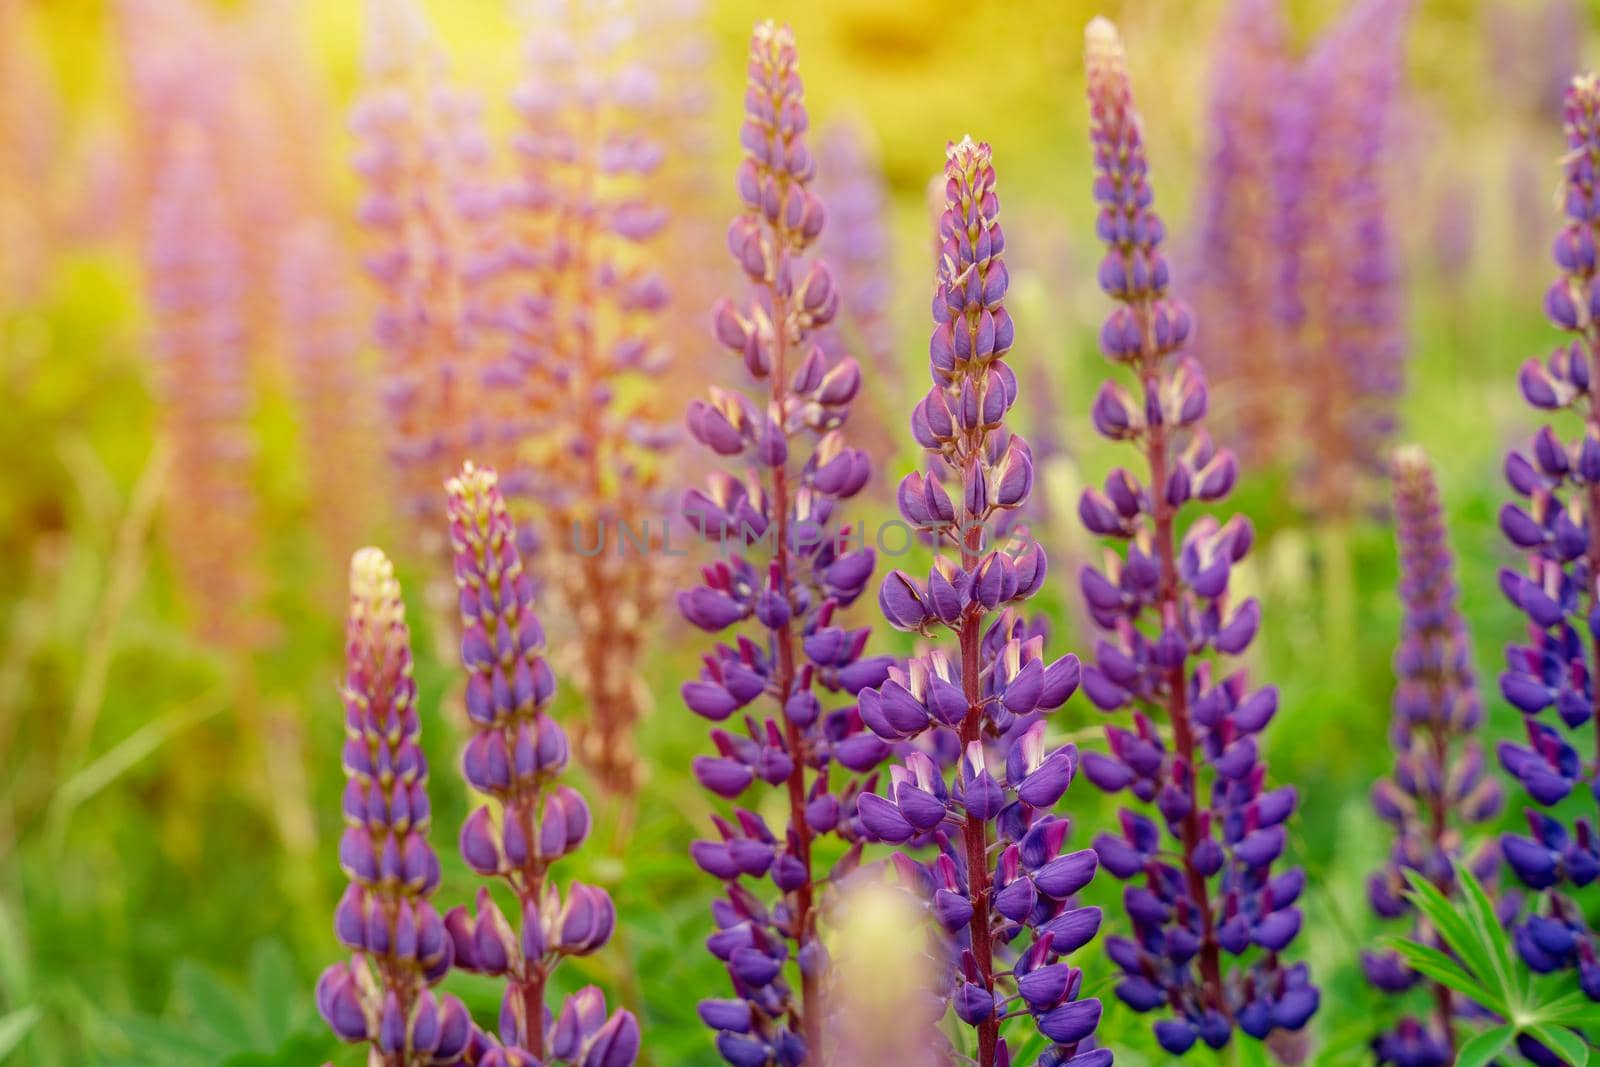 lupine flowers on meadow at sunset on a warm summer day Summer flowers. Summertime Space for text High quality photo by Iryna_Melnyk